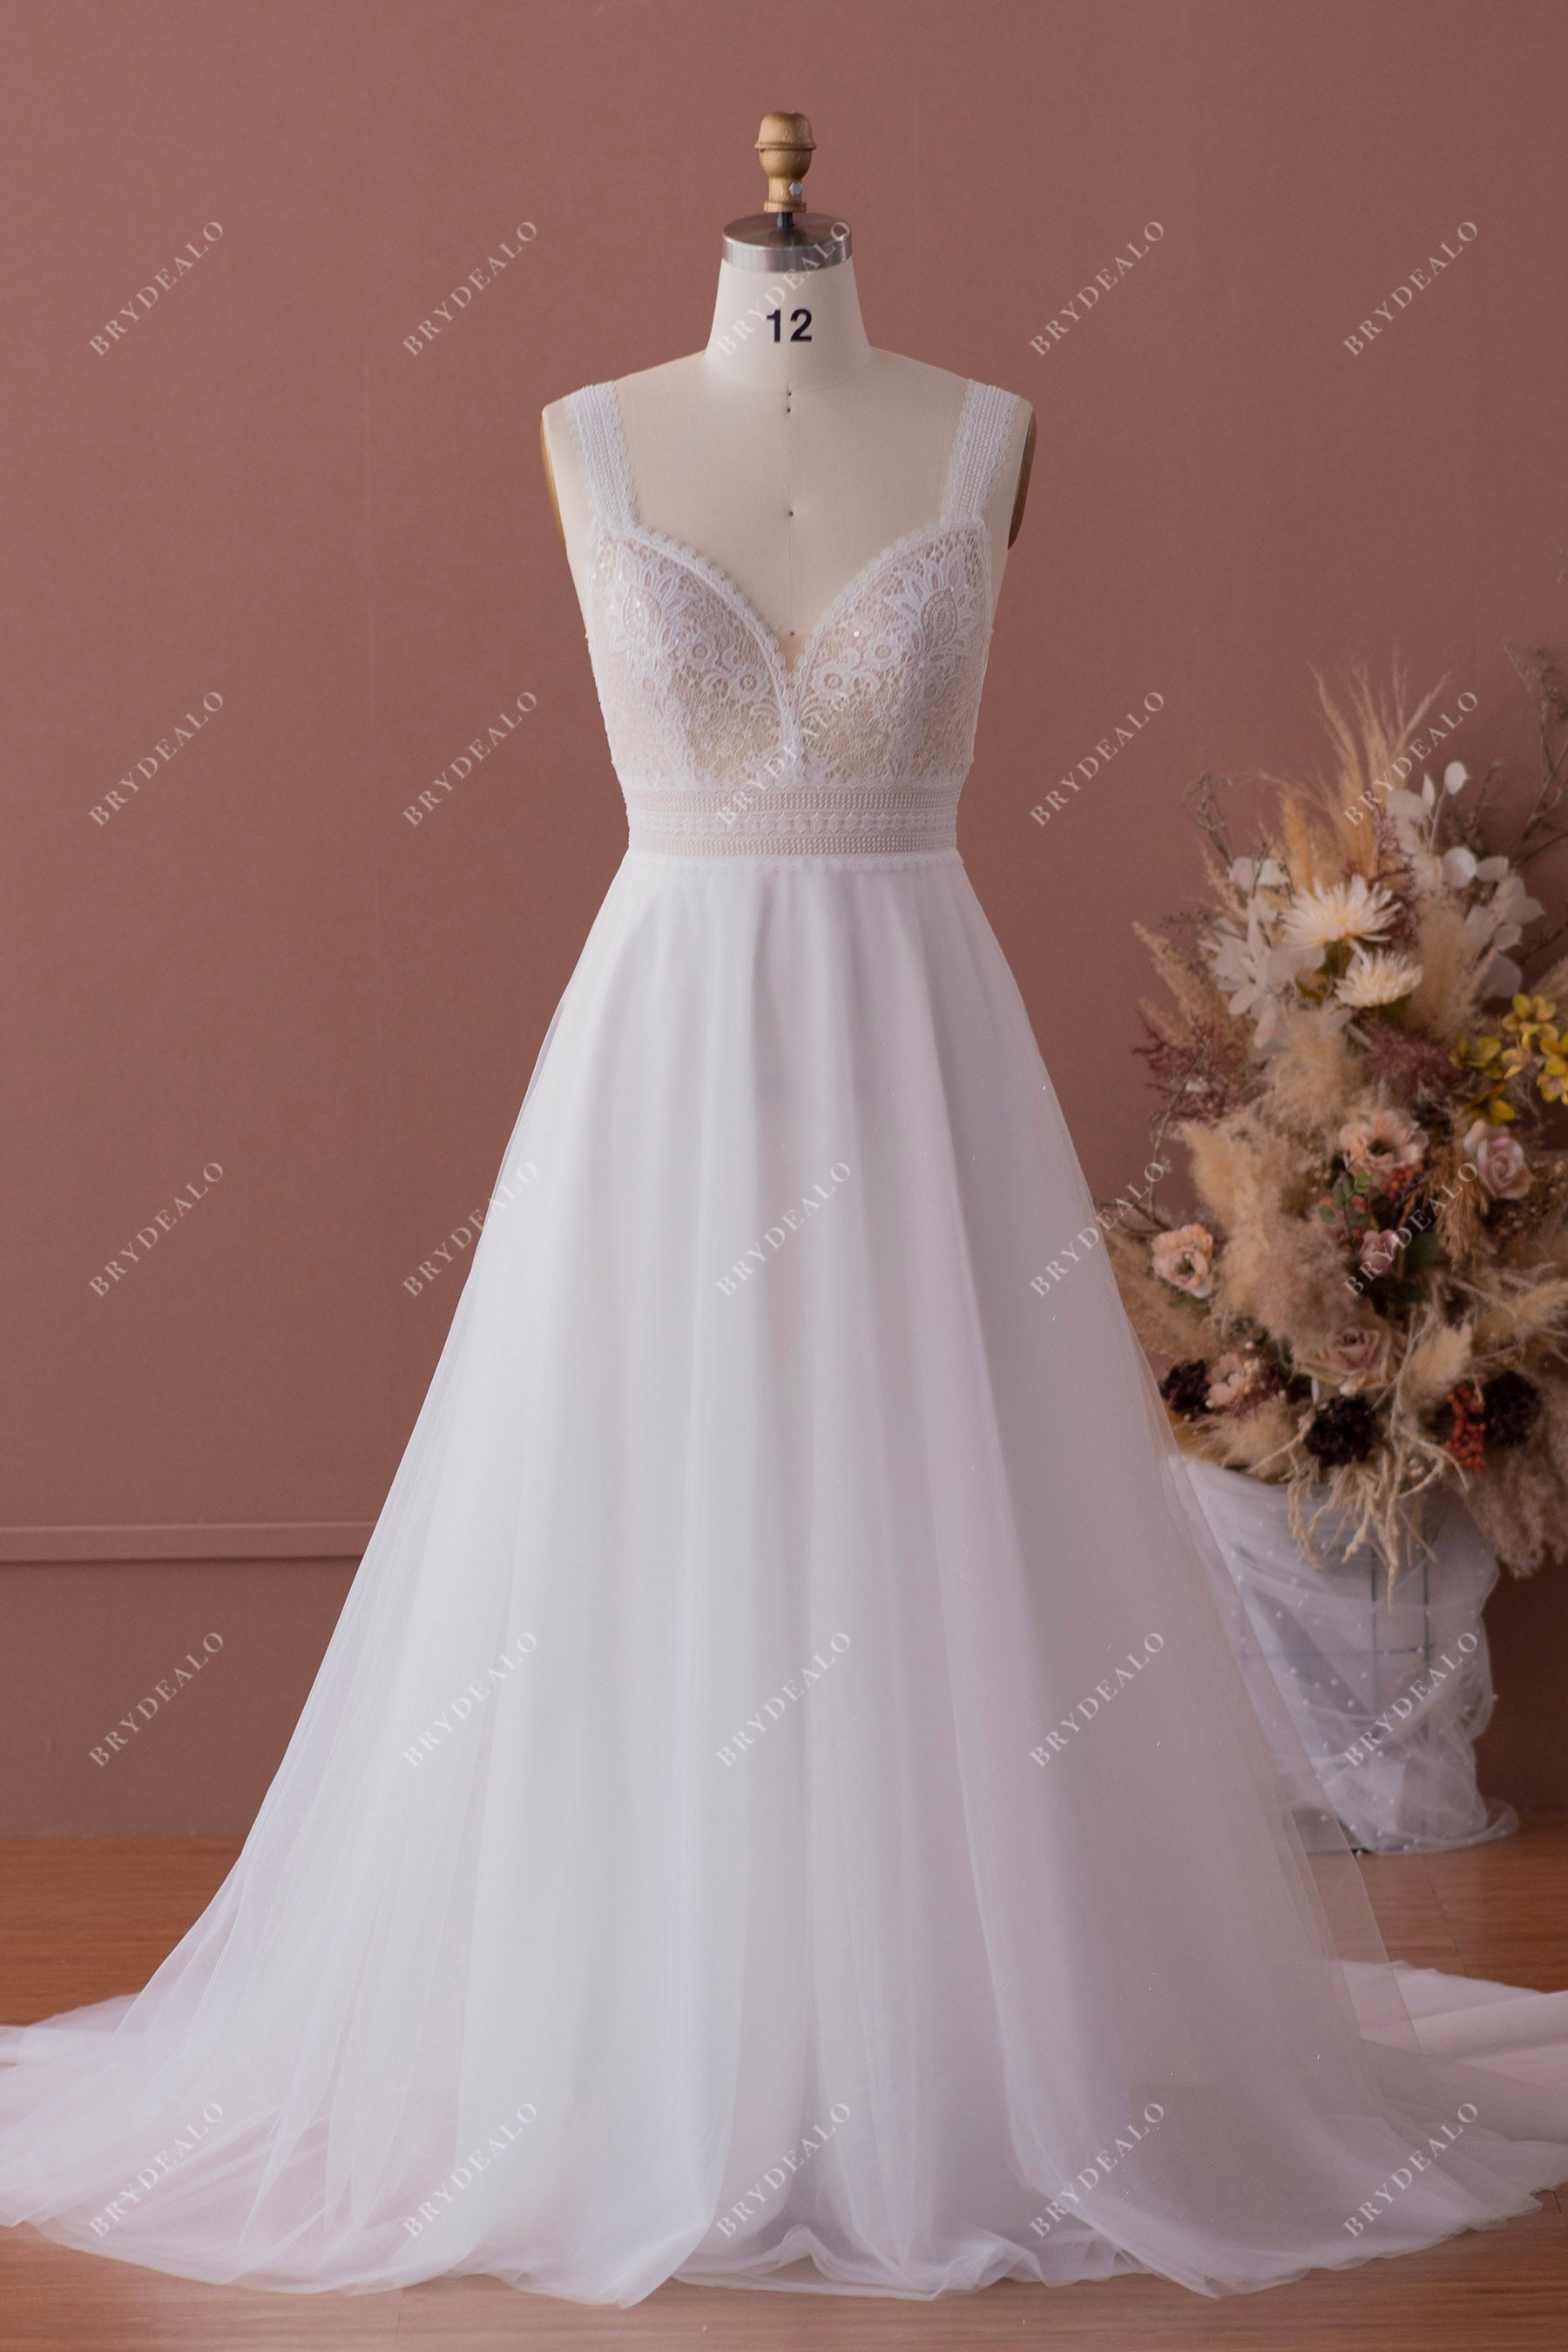 Shimmery Wide Straps Boho Lace Tulle A-line Wedding Dress